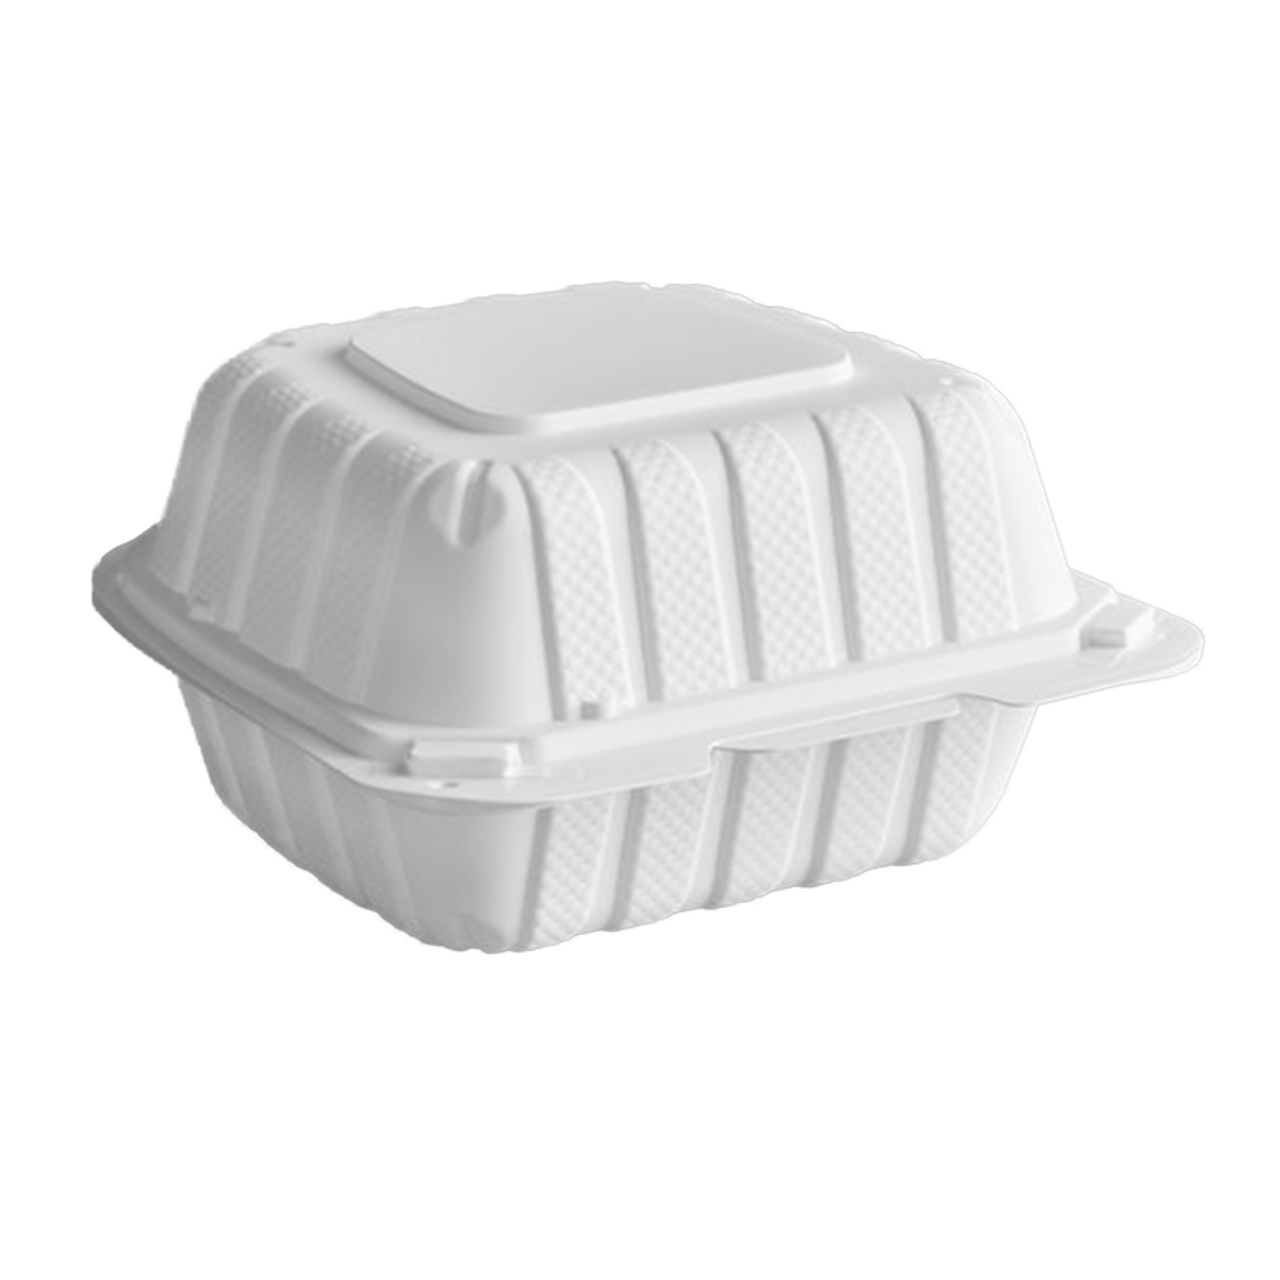 Sample 6" Microwaveable Plastic Clamshell Food Containers 250pcs